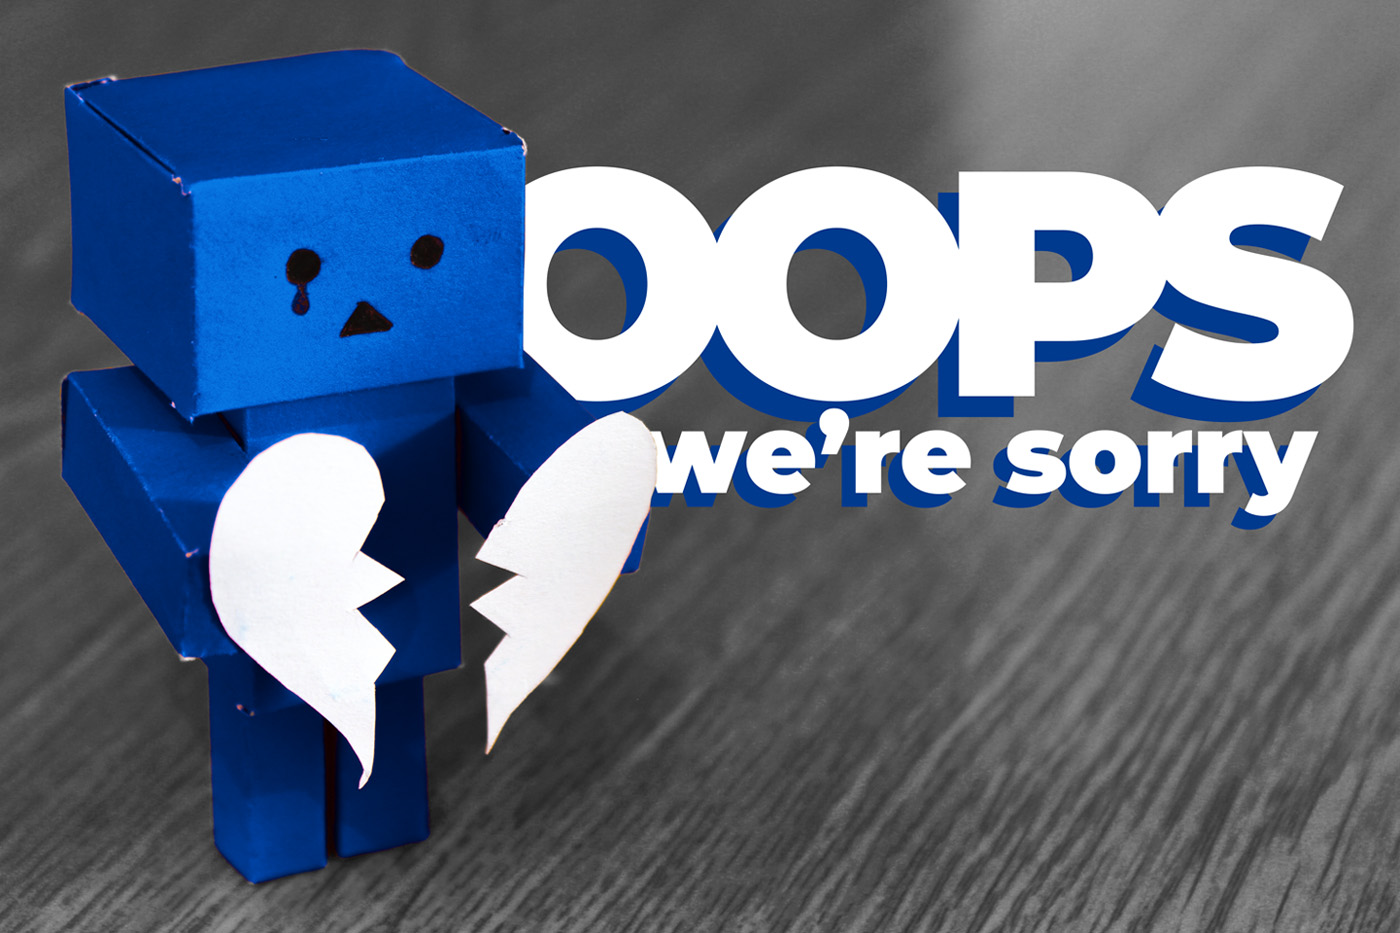 A cute but sad little blue robot holding a broken heart, with the words "Oops, we're sorry!"